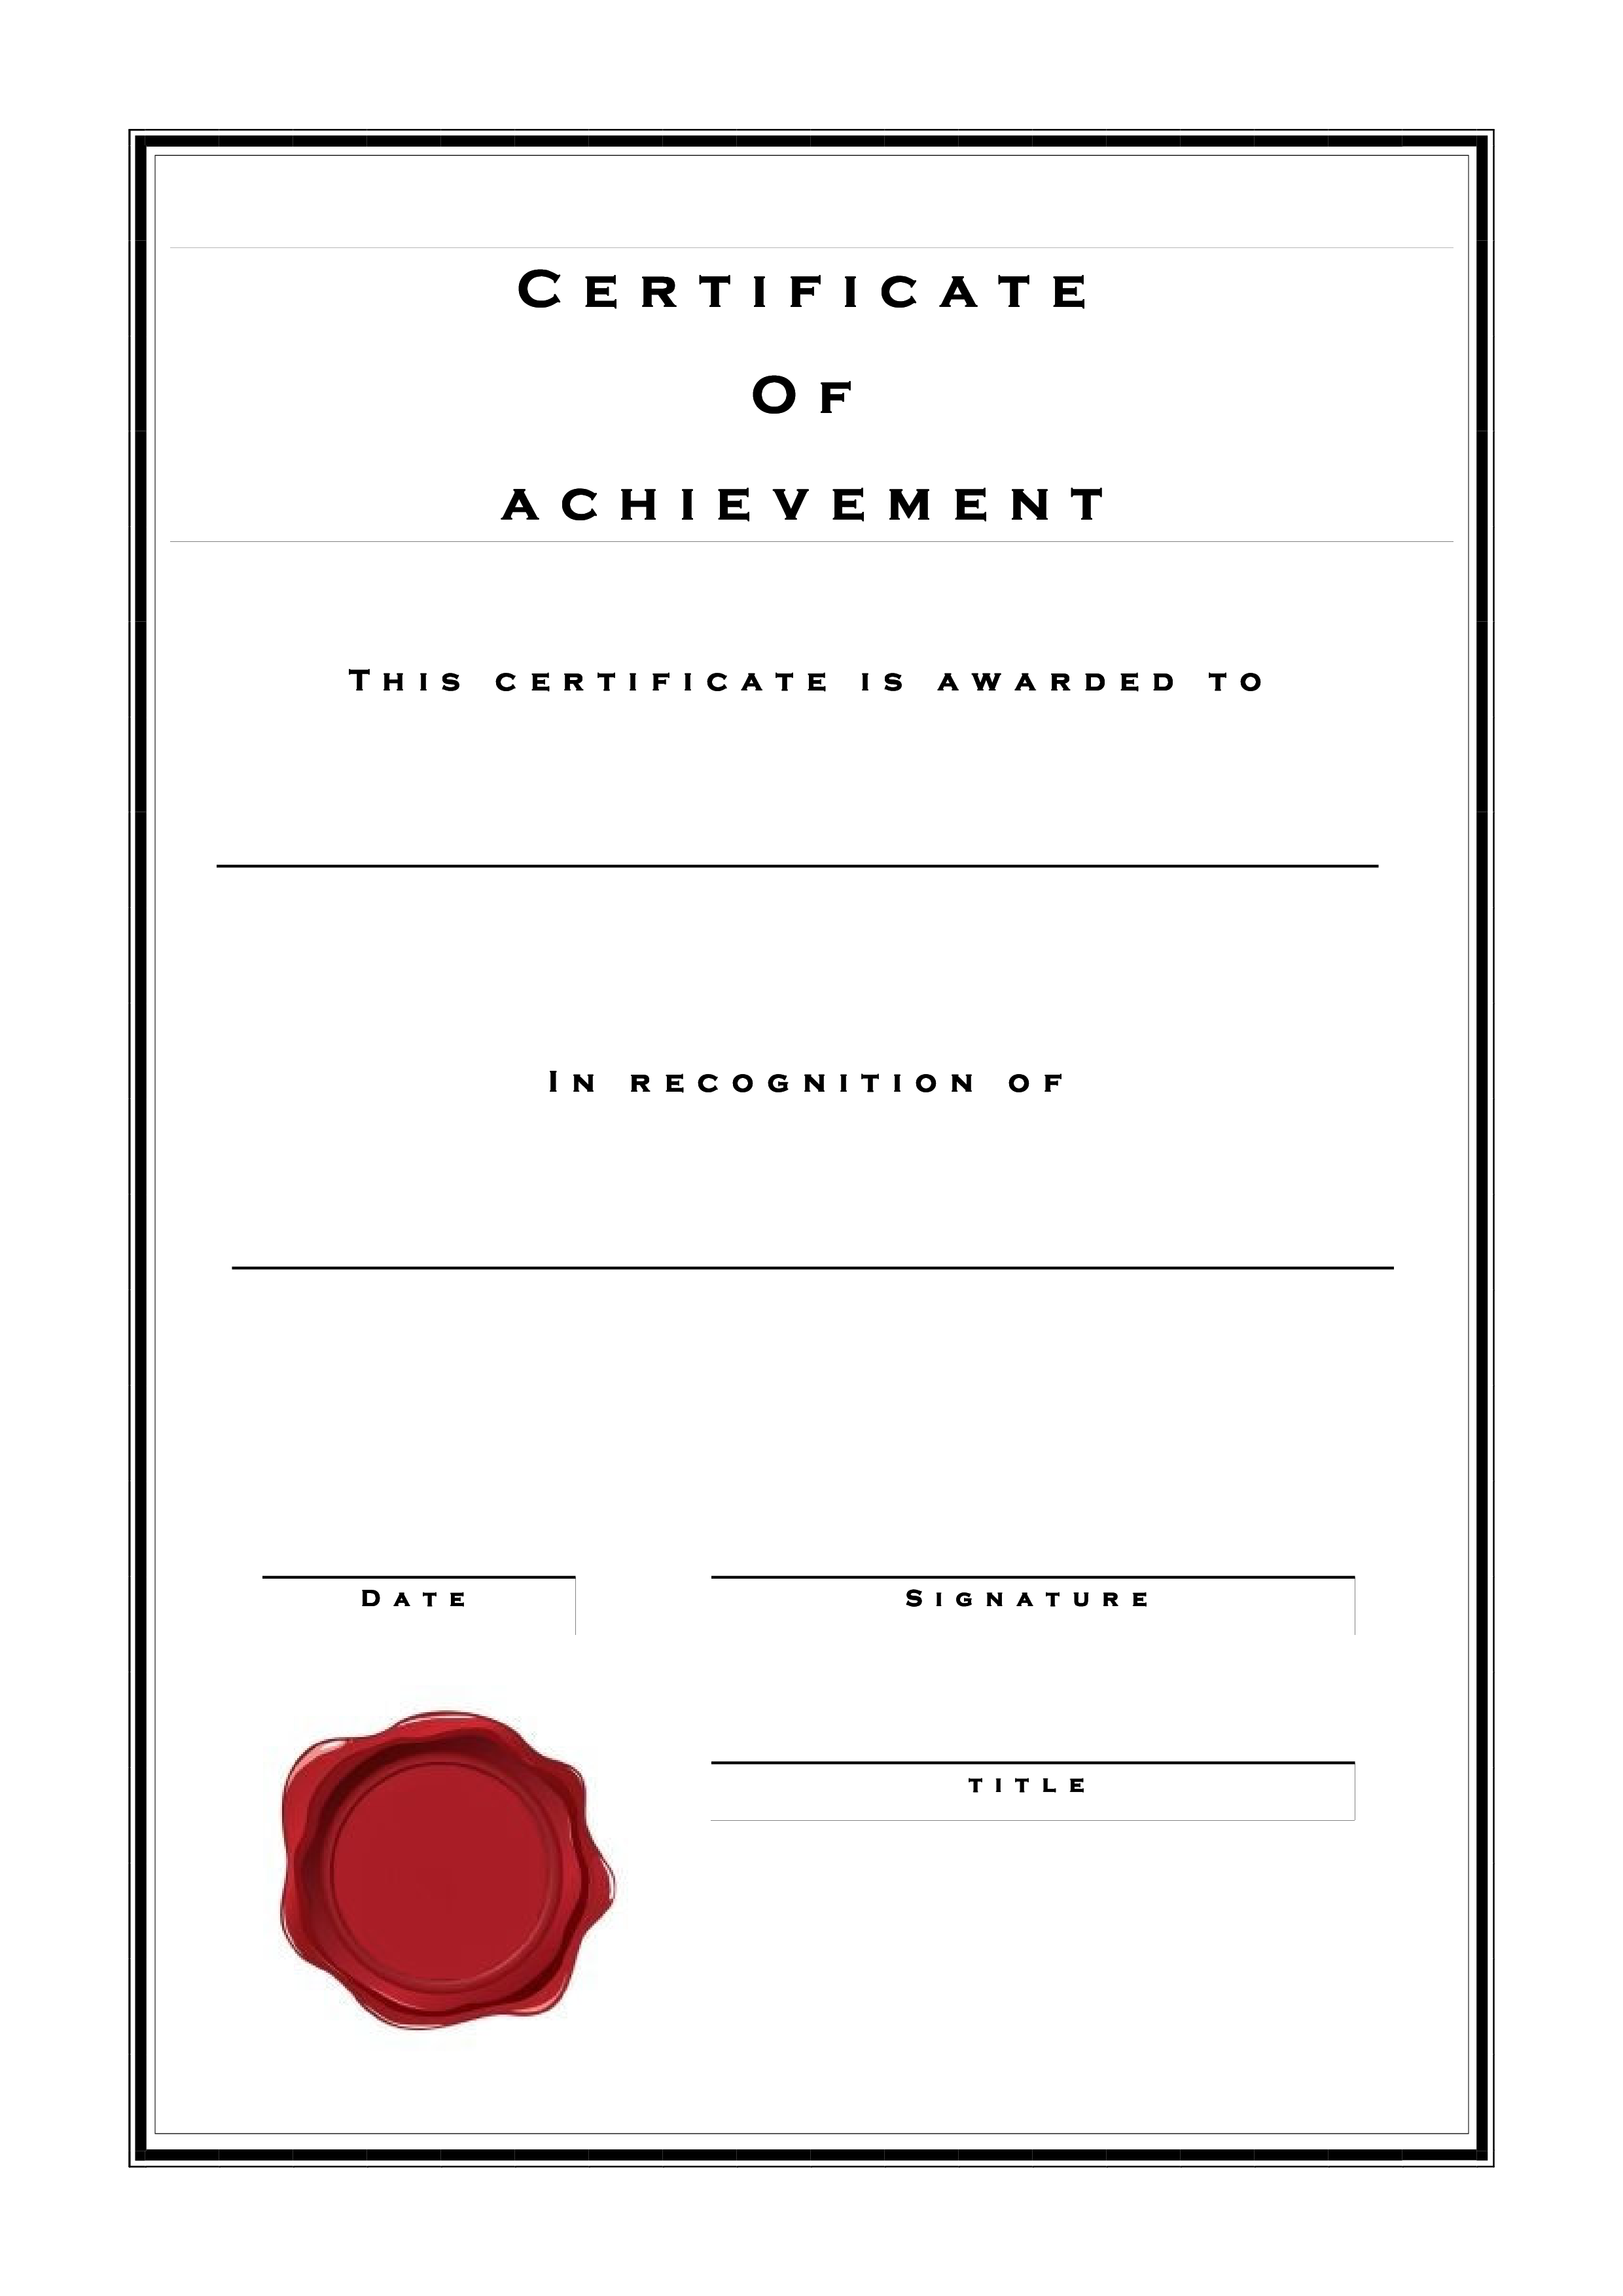 Certificate Of Achievement Formal Style main image